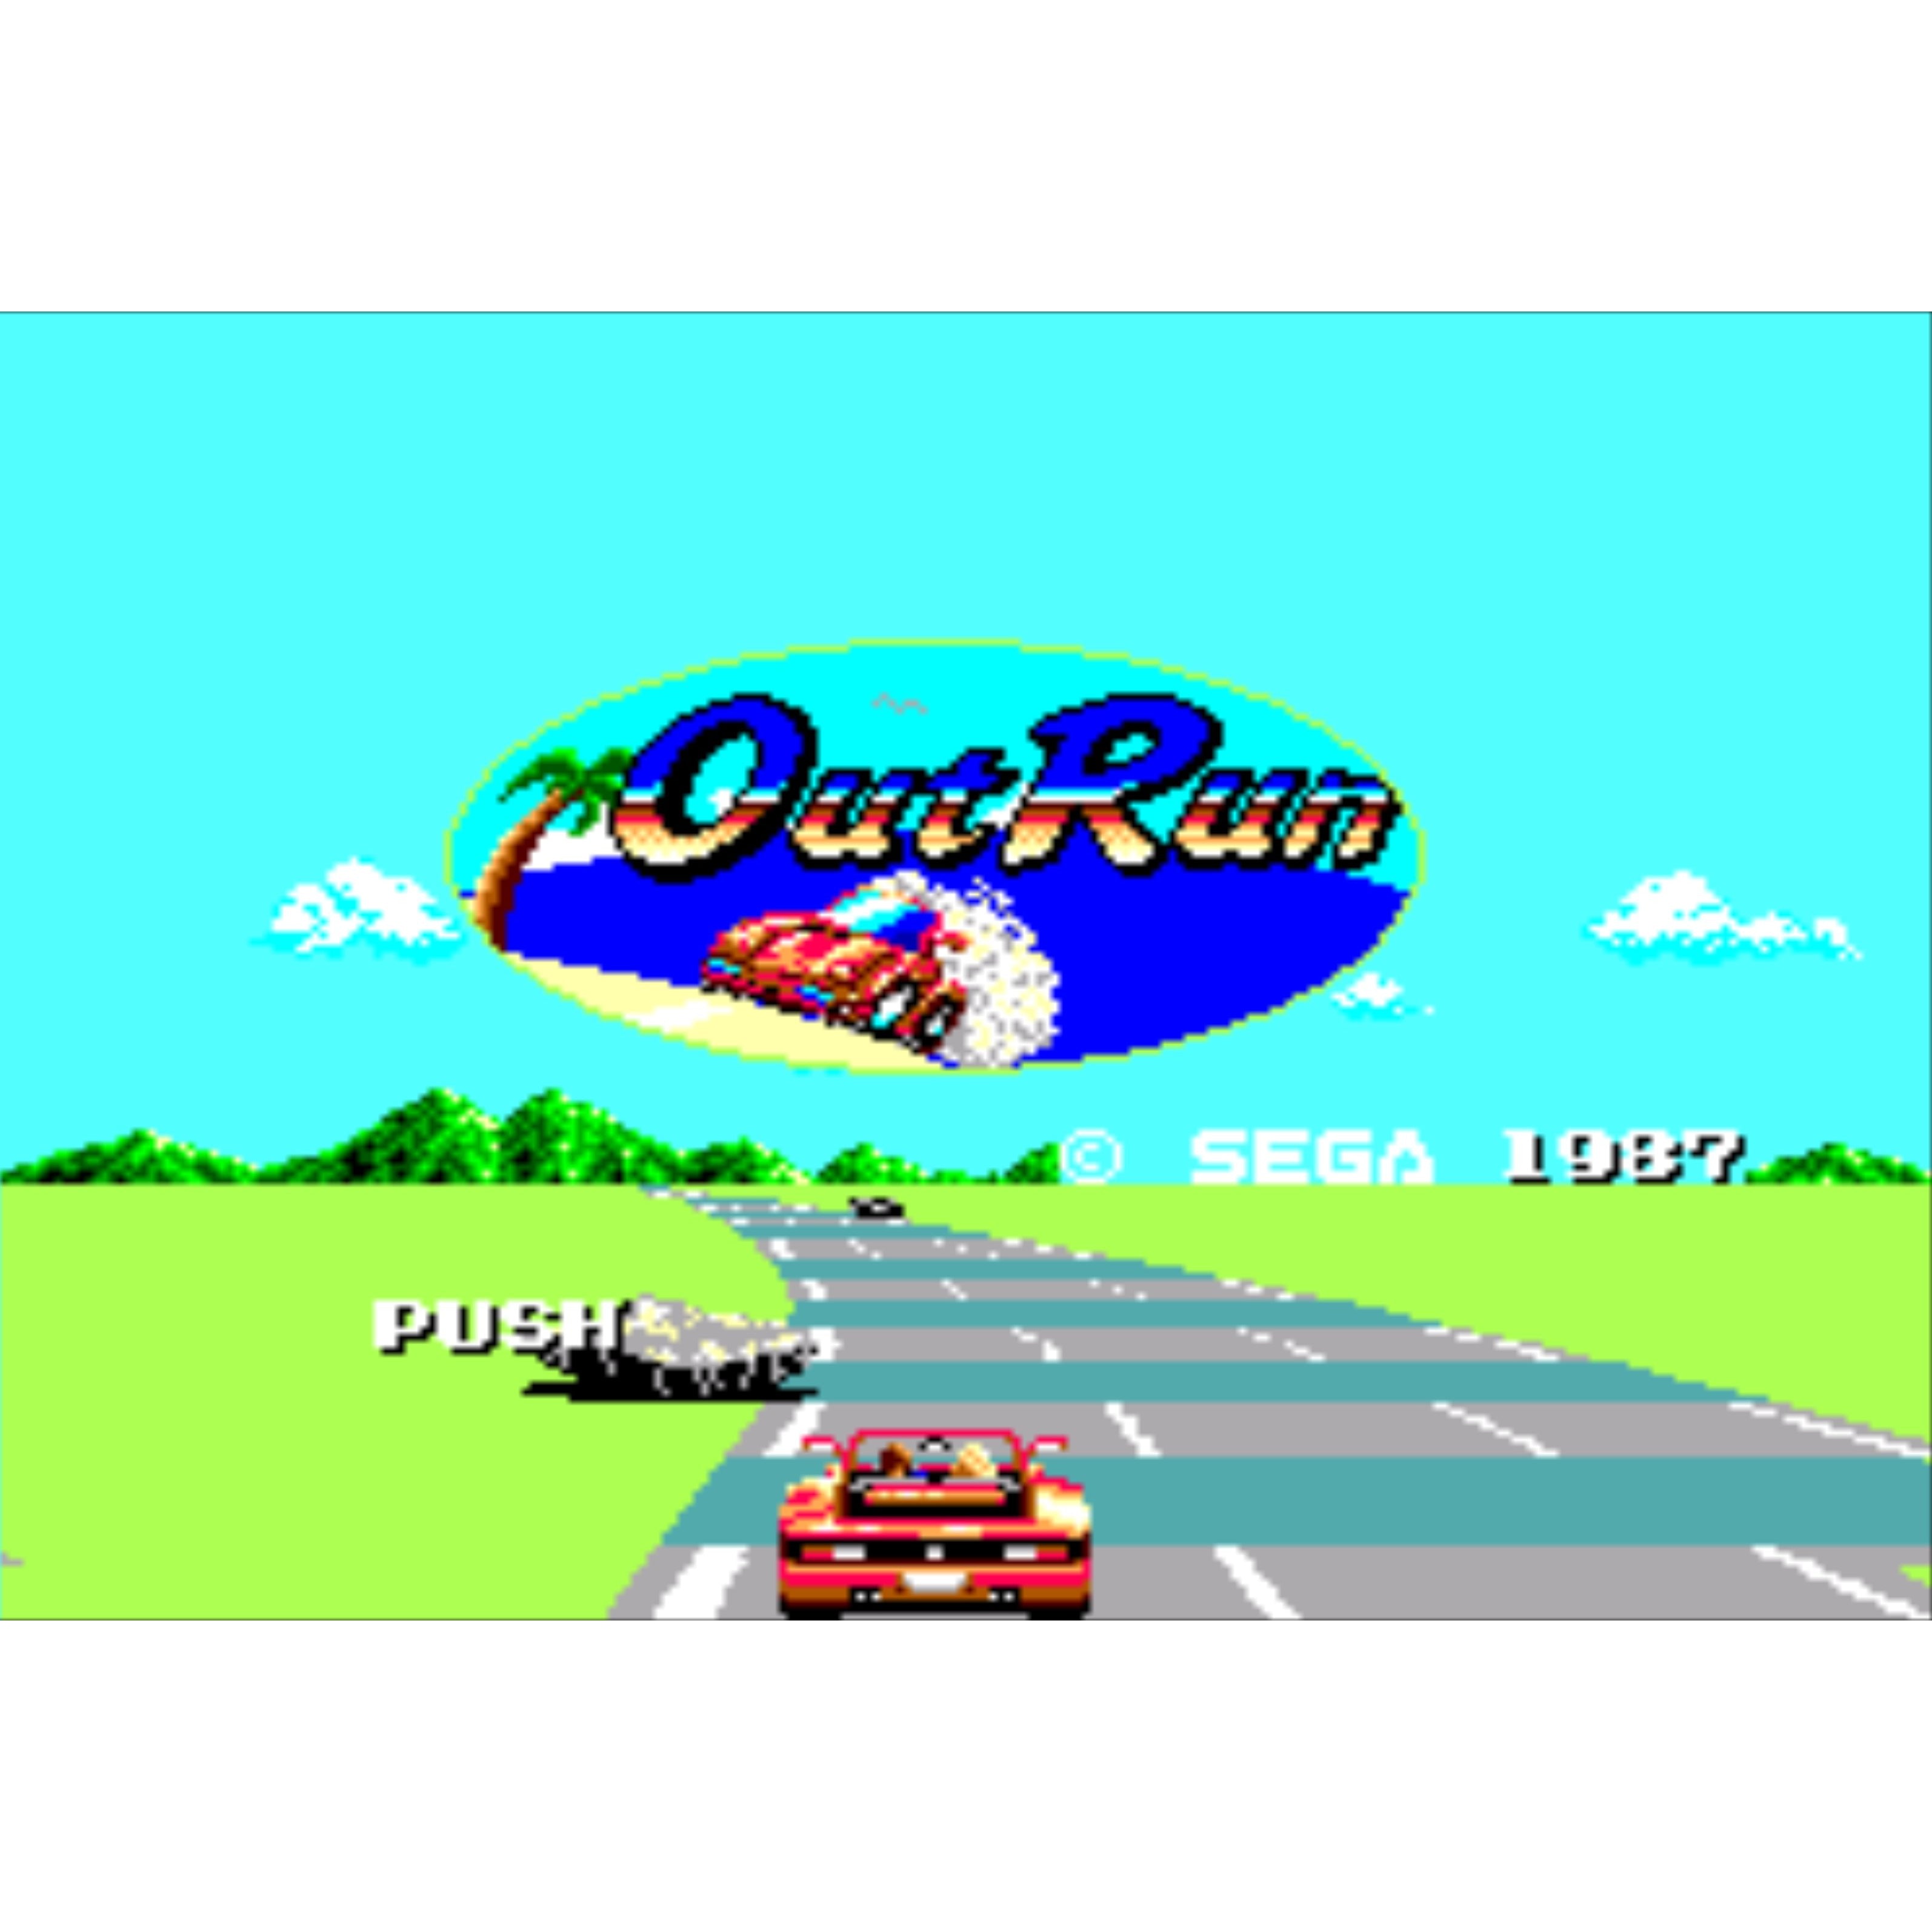 Out Run - Sega Master System Game Complete - YourGamingShop.com - Buy, Sell, Trade Video Games Online. 120 Day Warranty. Satisfaction Guaranteed.